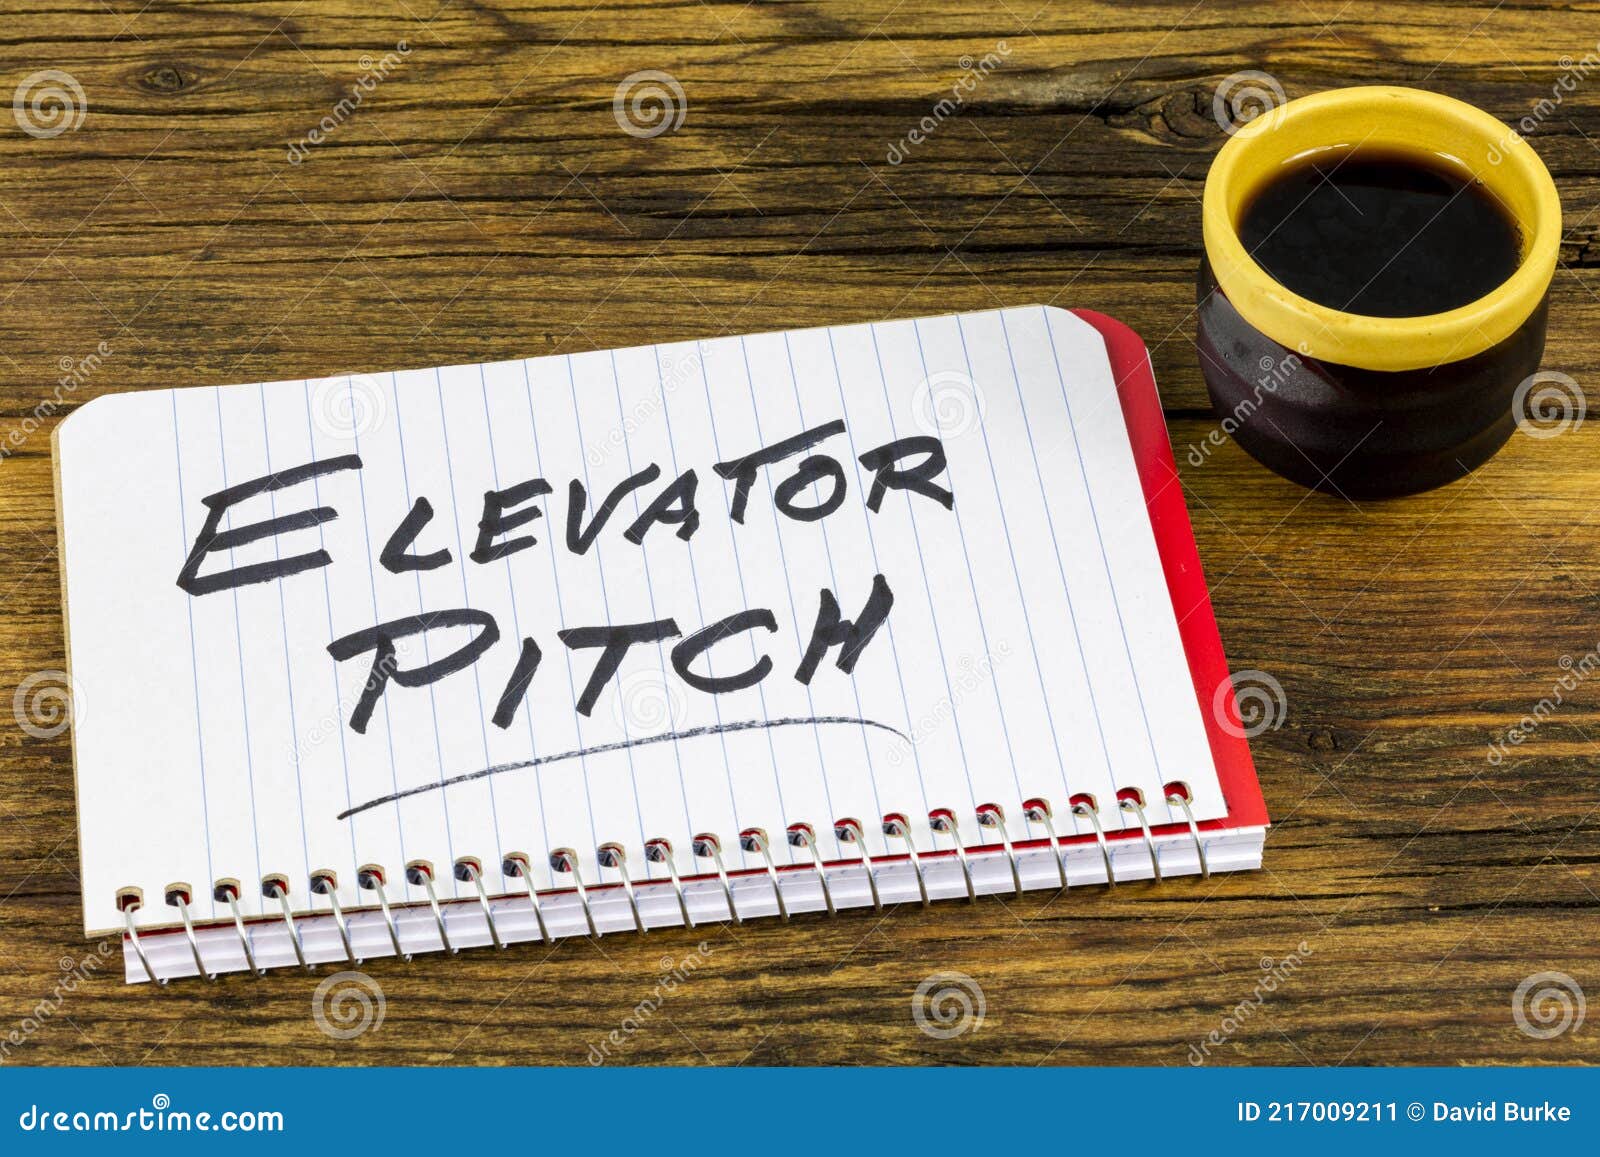 elevator pitch investment sales presentation promotion deal coffee meeting